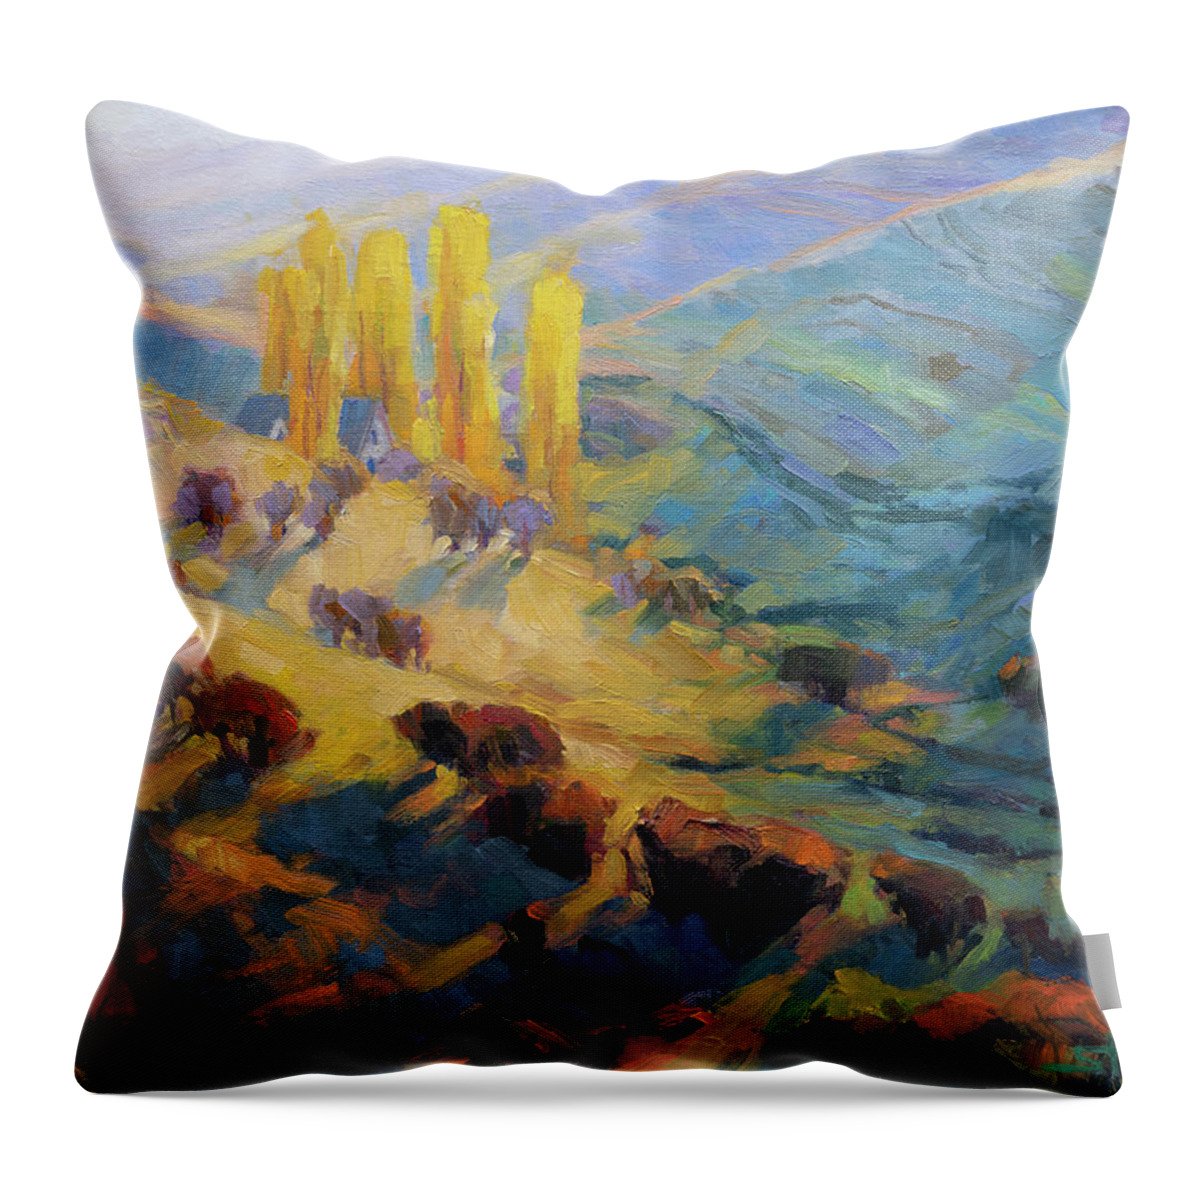 Landscape Throw Pillow featuring the painting Hidden Homestead by Steve Henderson